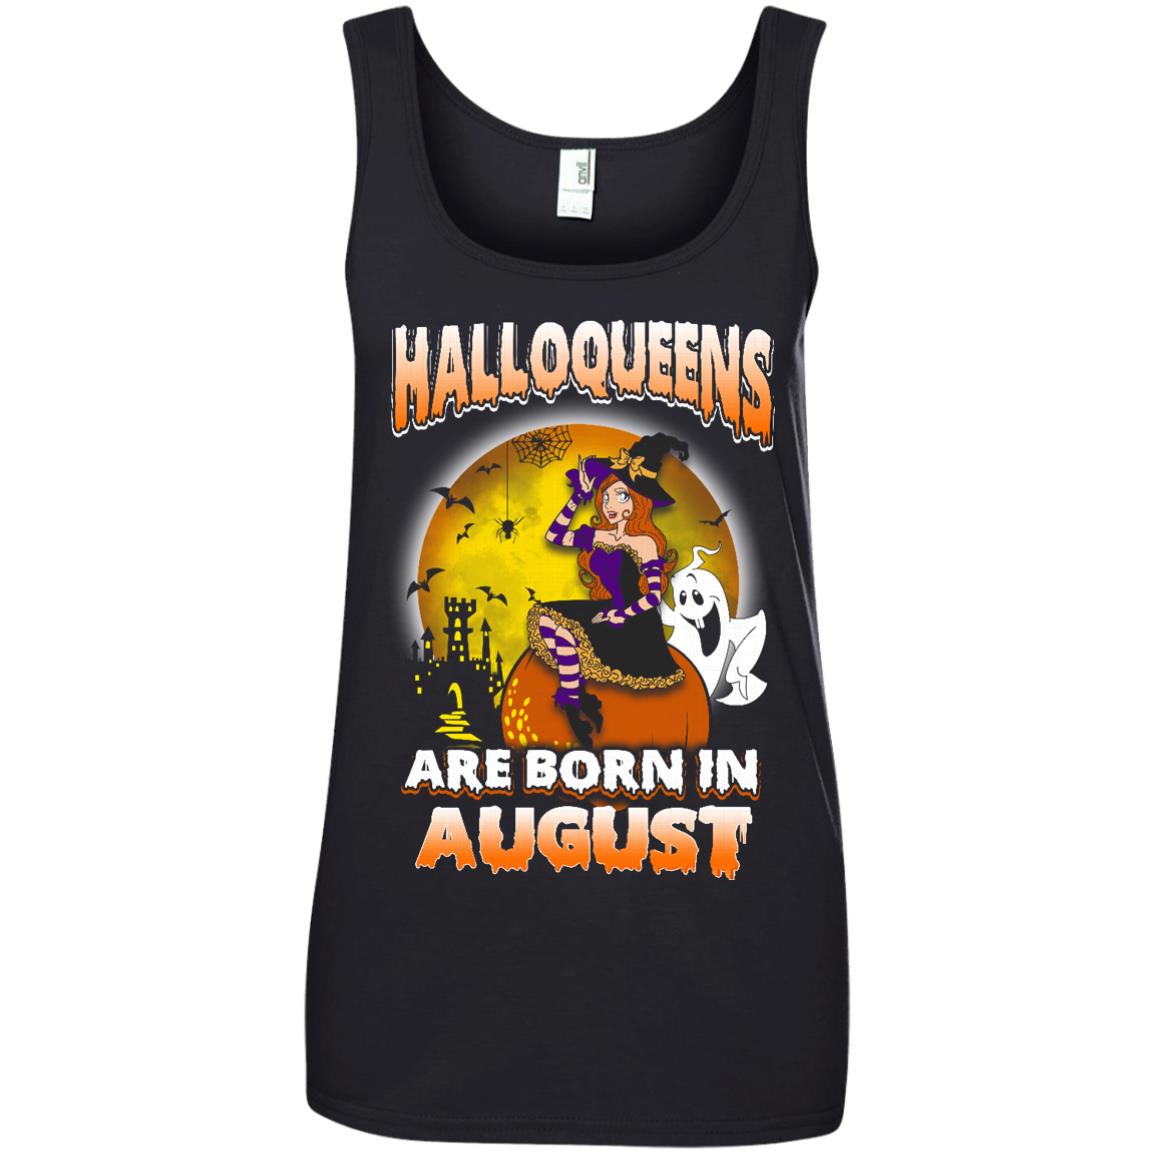 Halloqueens are born in August shirt, hoodie, tank